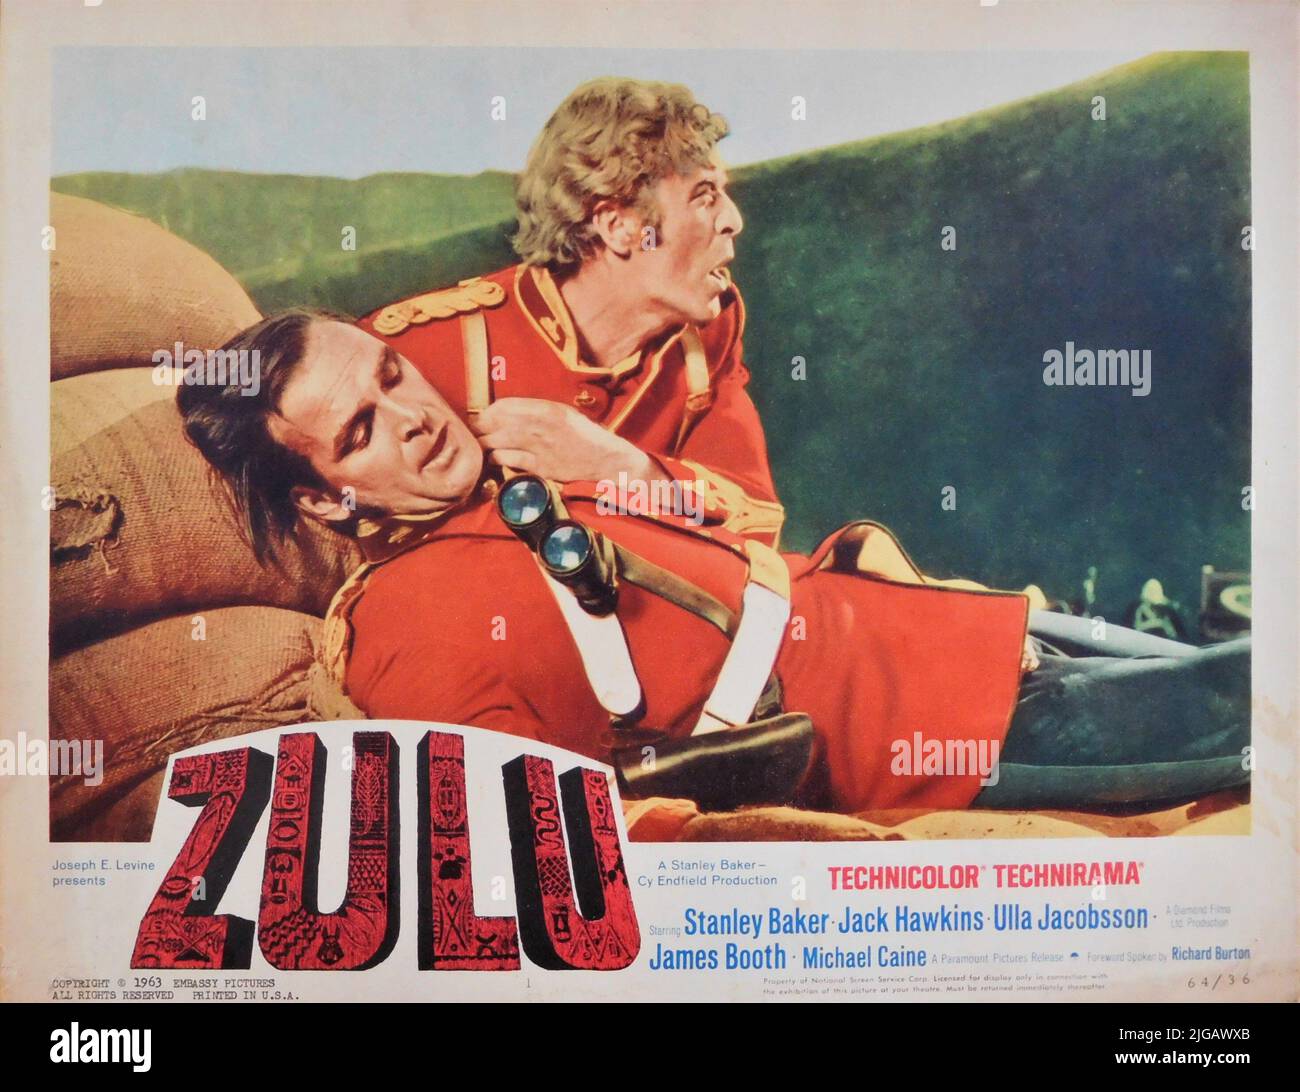 STANLEY BAKER as Lieutenant John Chard Royal Engineers and MICHAEL CAINE as Lieutenant Gonville Bromhead in ZULU 1964 director CY ENFIELD music John Barry Diamond Films / Paramount British Pictures / Embassy Pictures (US) Stock Photo